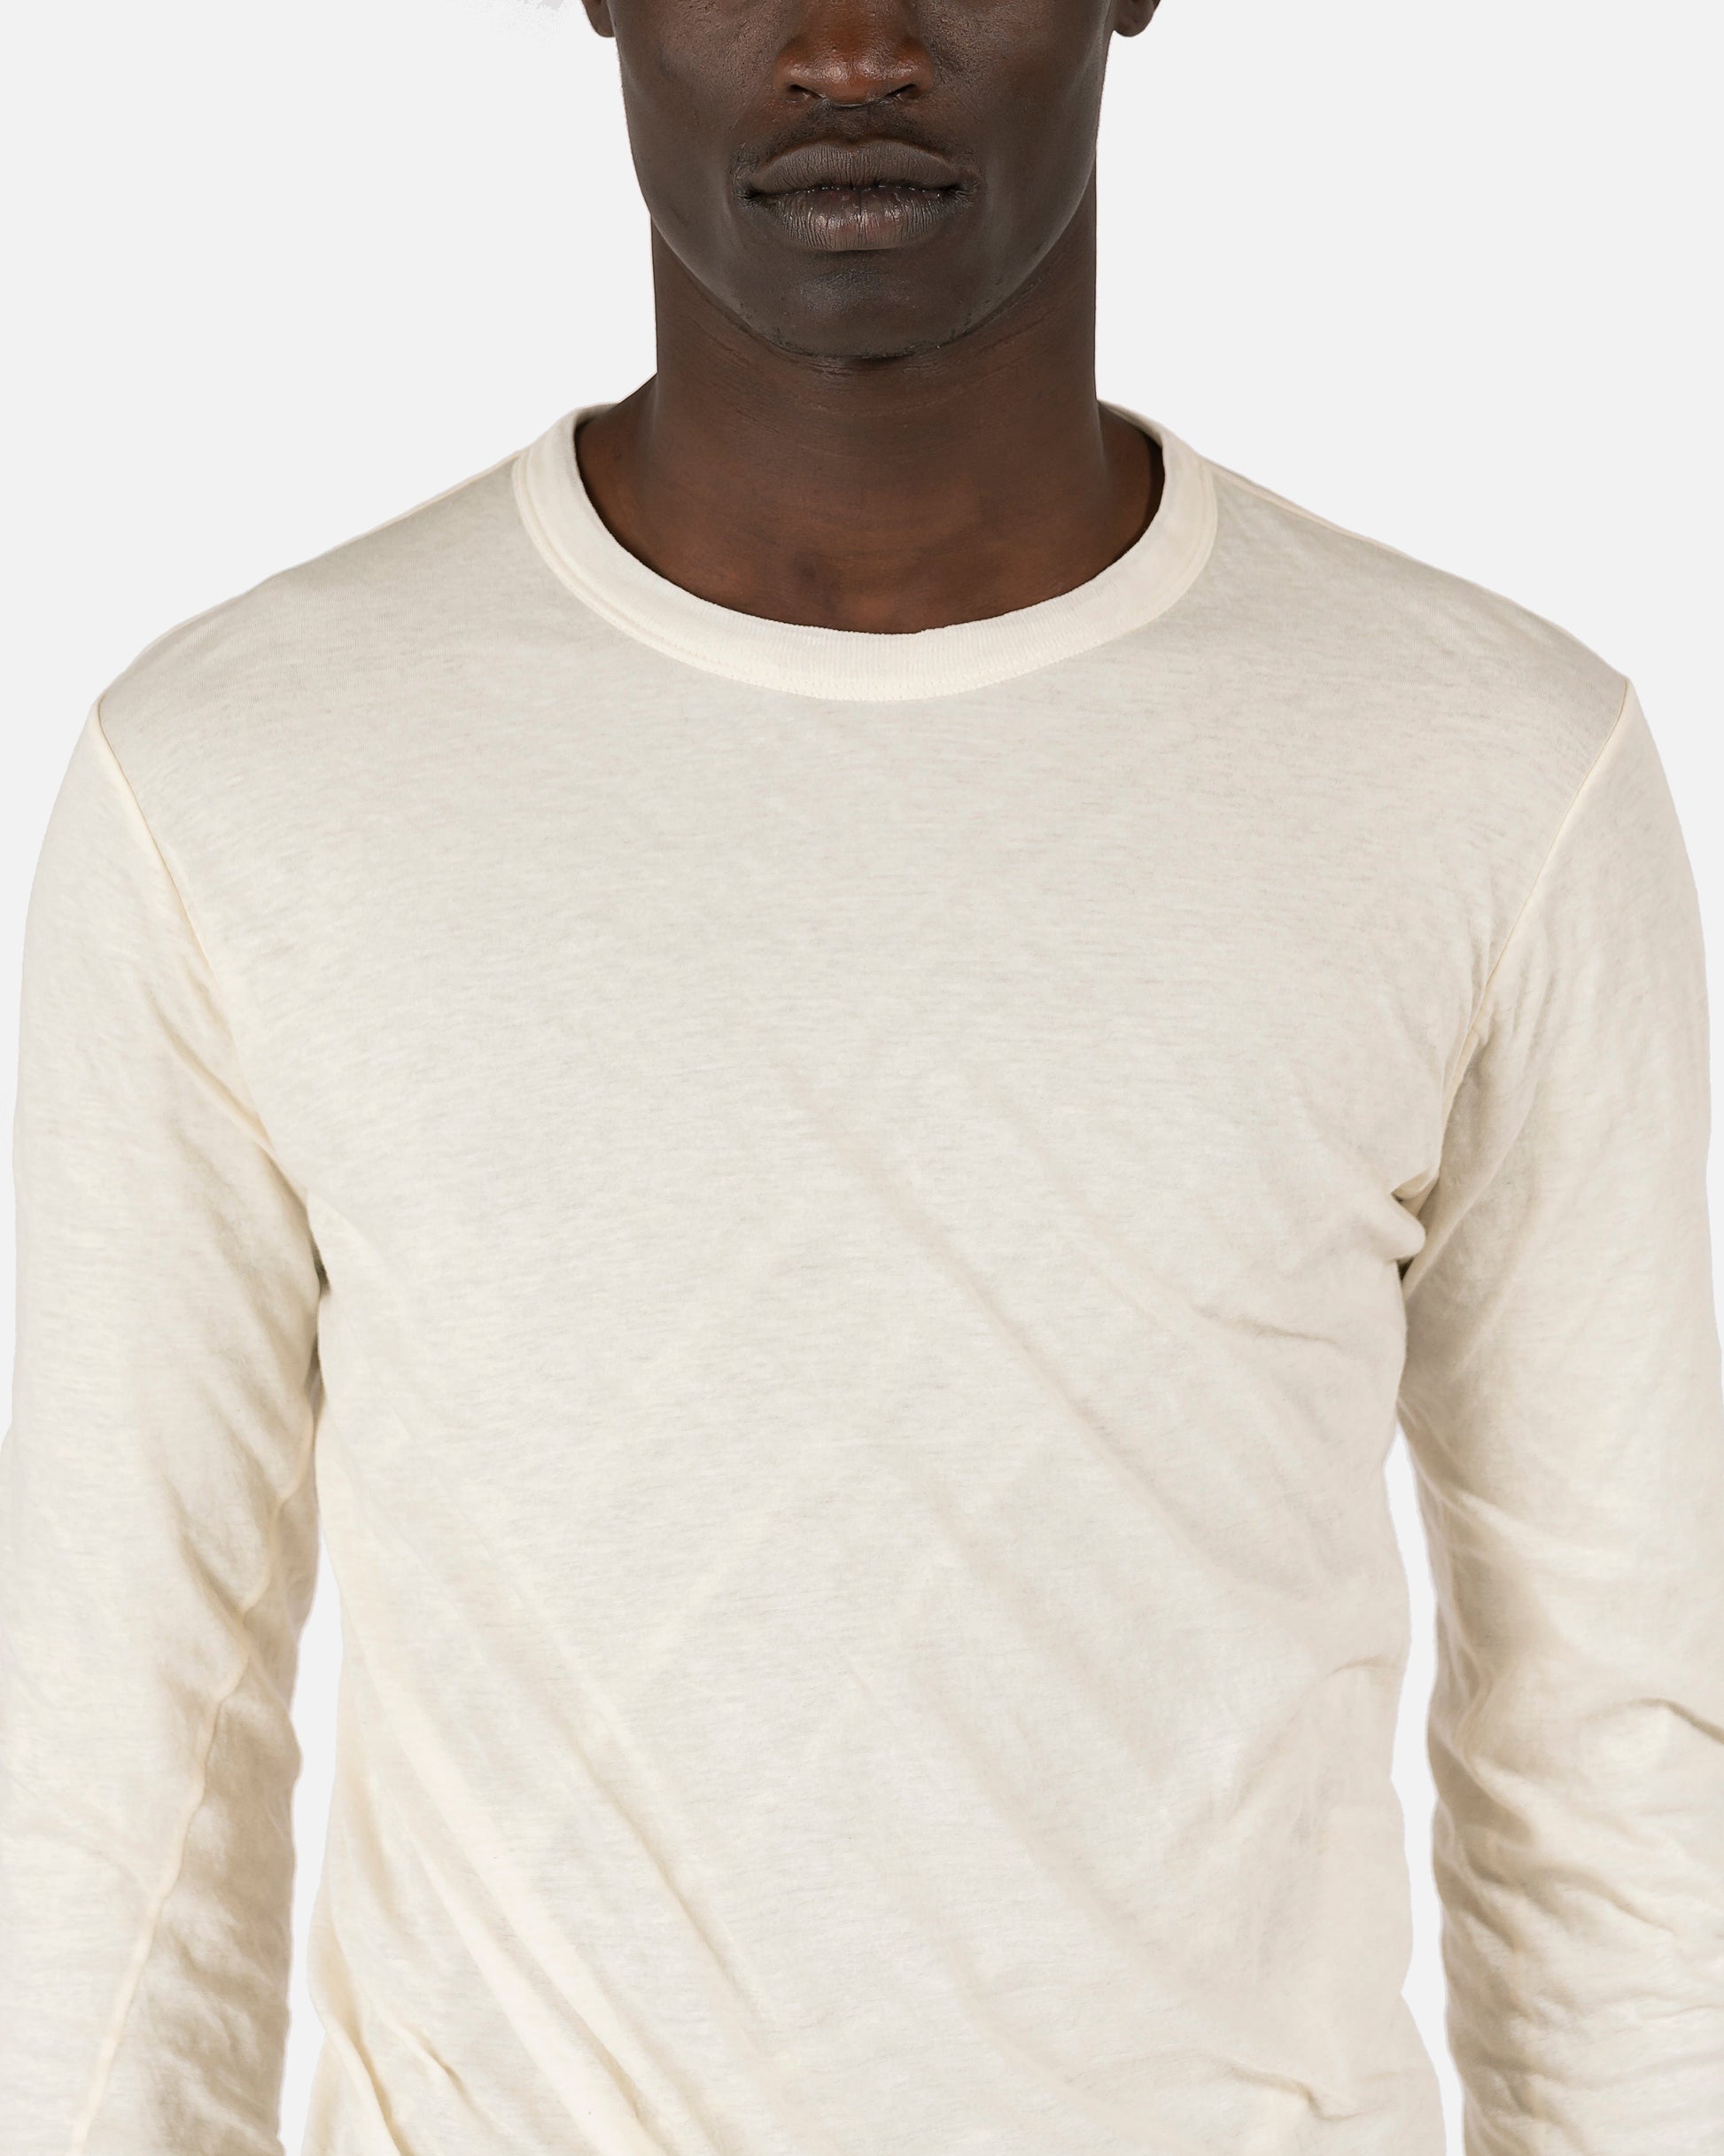 Rick Owens Men's T-Shirts Double Layer Longsleeve T-Shirt in Natural